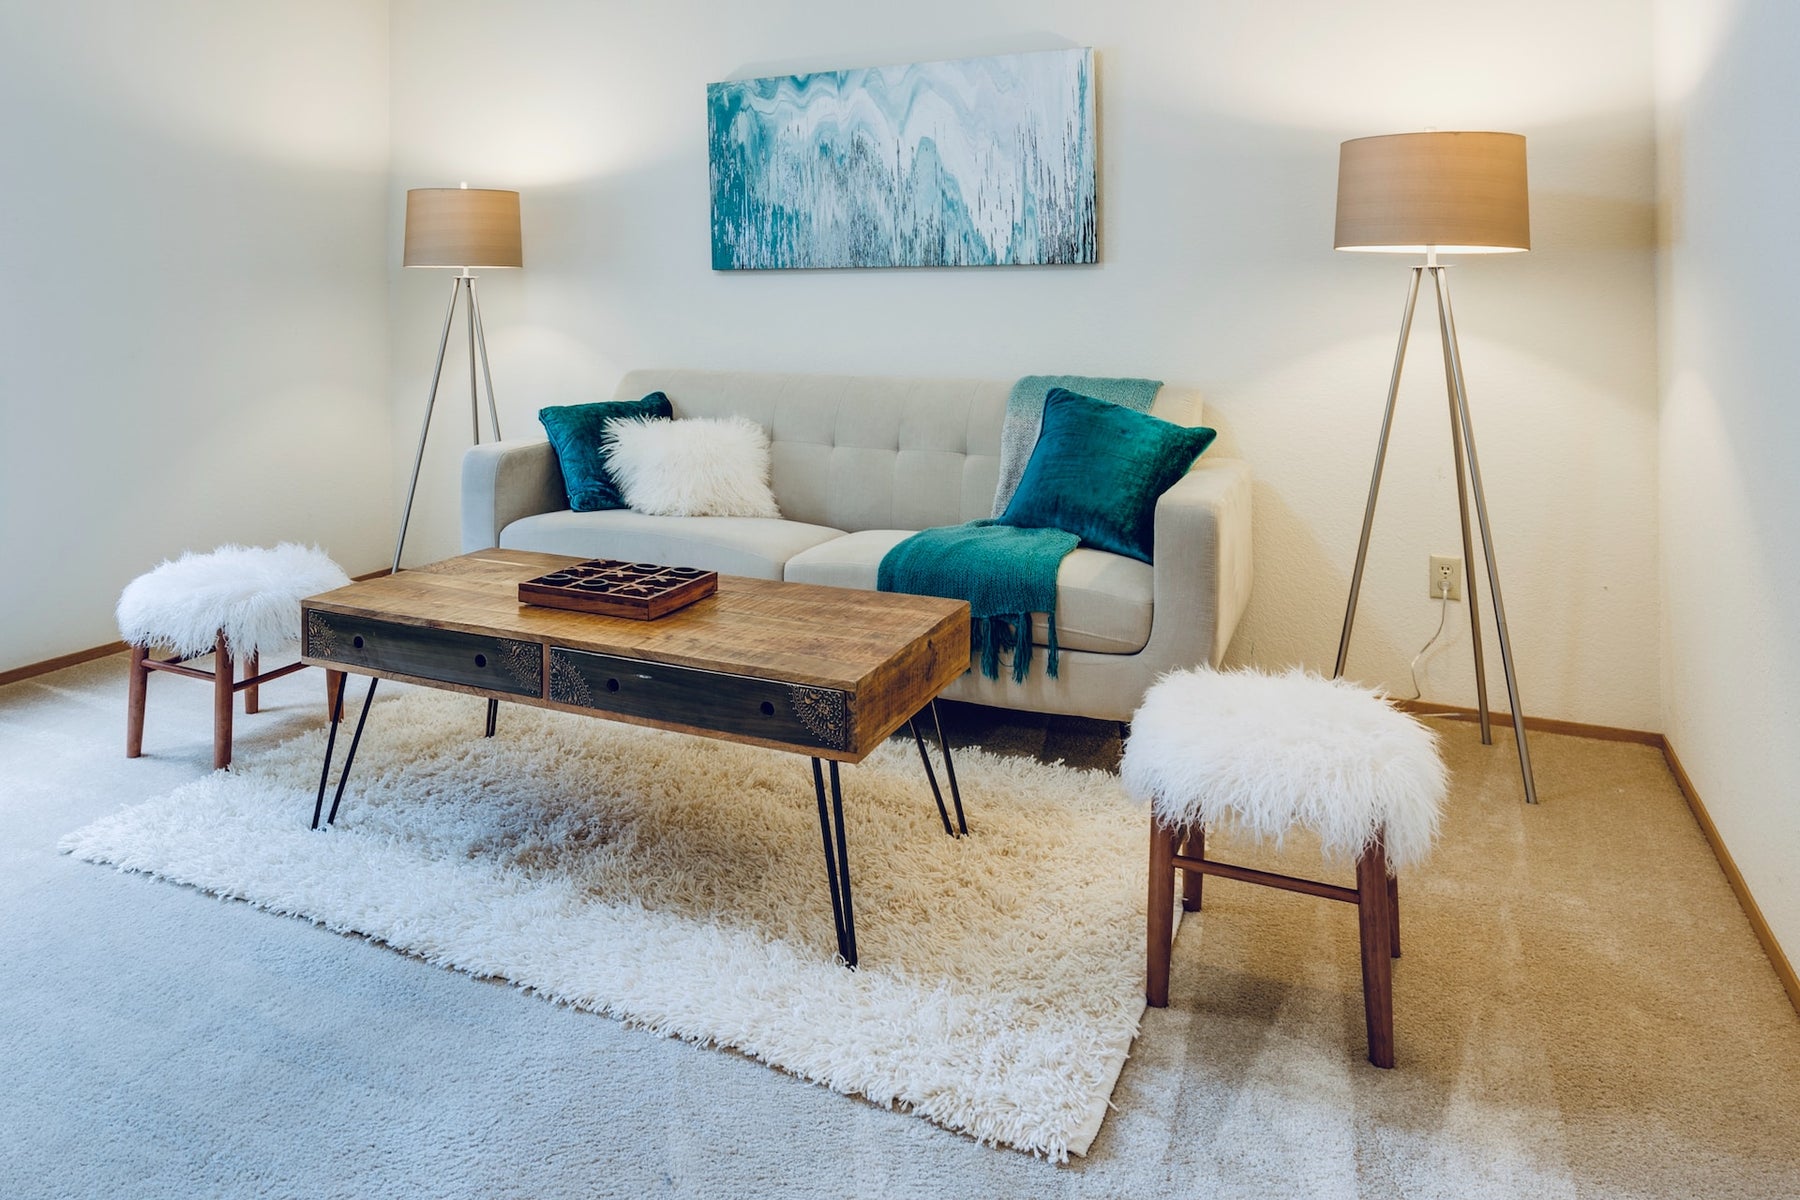 7 Reasons That Make Rugs An Essential For Home Decor